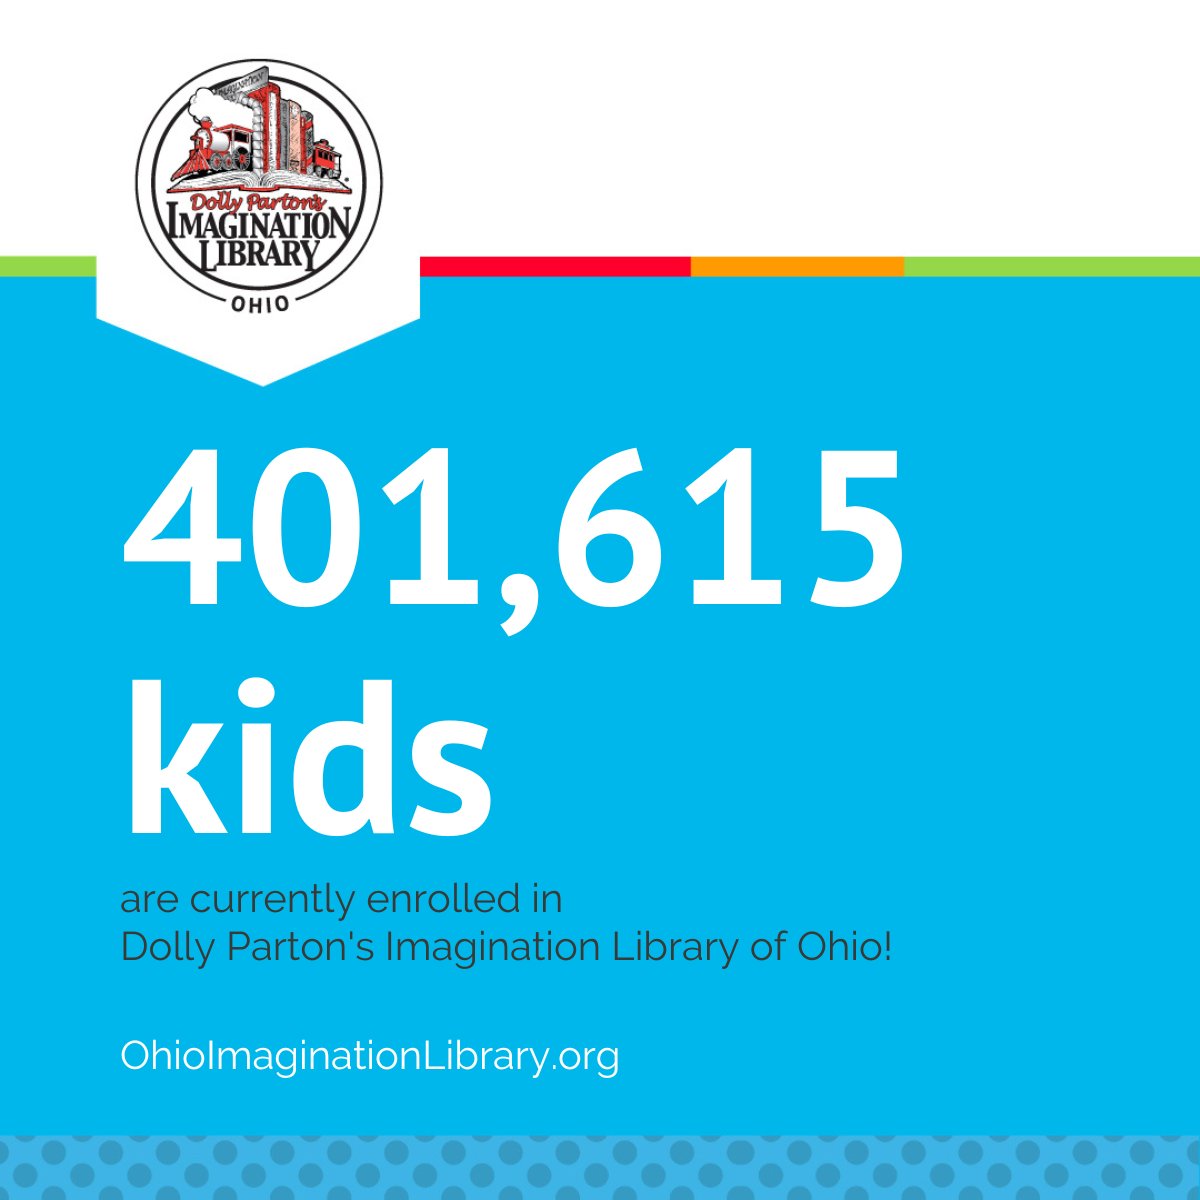 Thousands of @dollyslibrary books were mailed this month! In Ohio, any child between 0-5 years old can sign up to receive a monthly book at no cost to their family ➡️ ohioimaginationlibrary.org